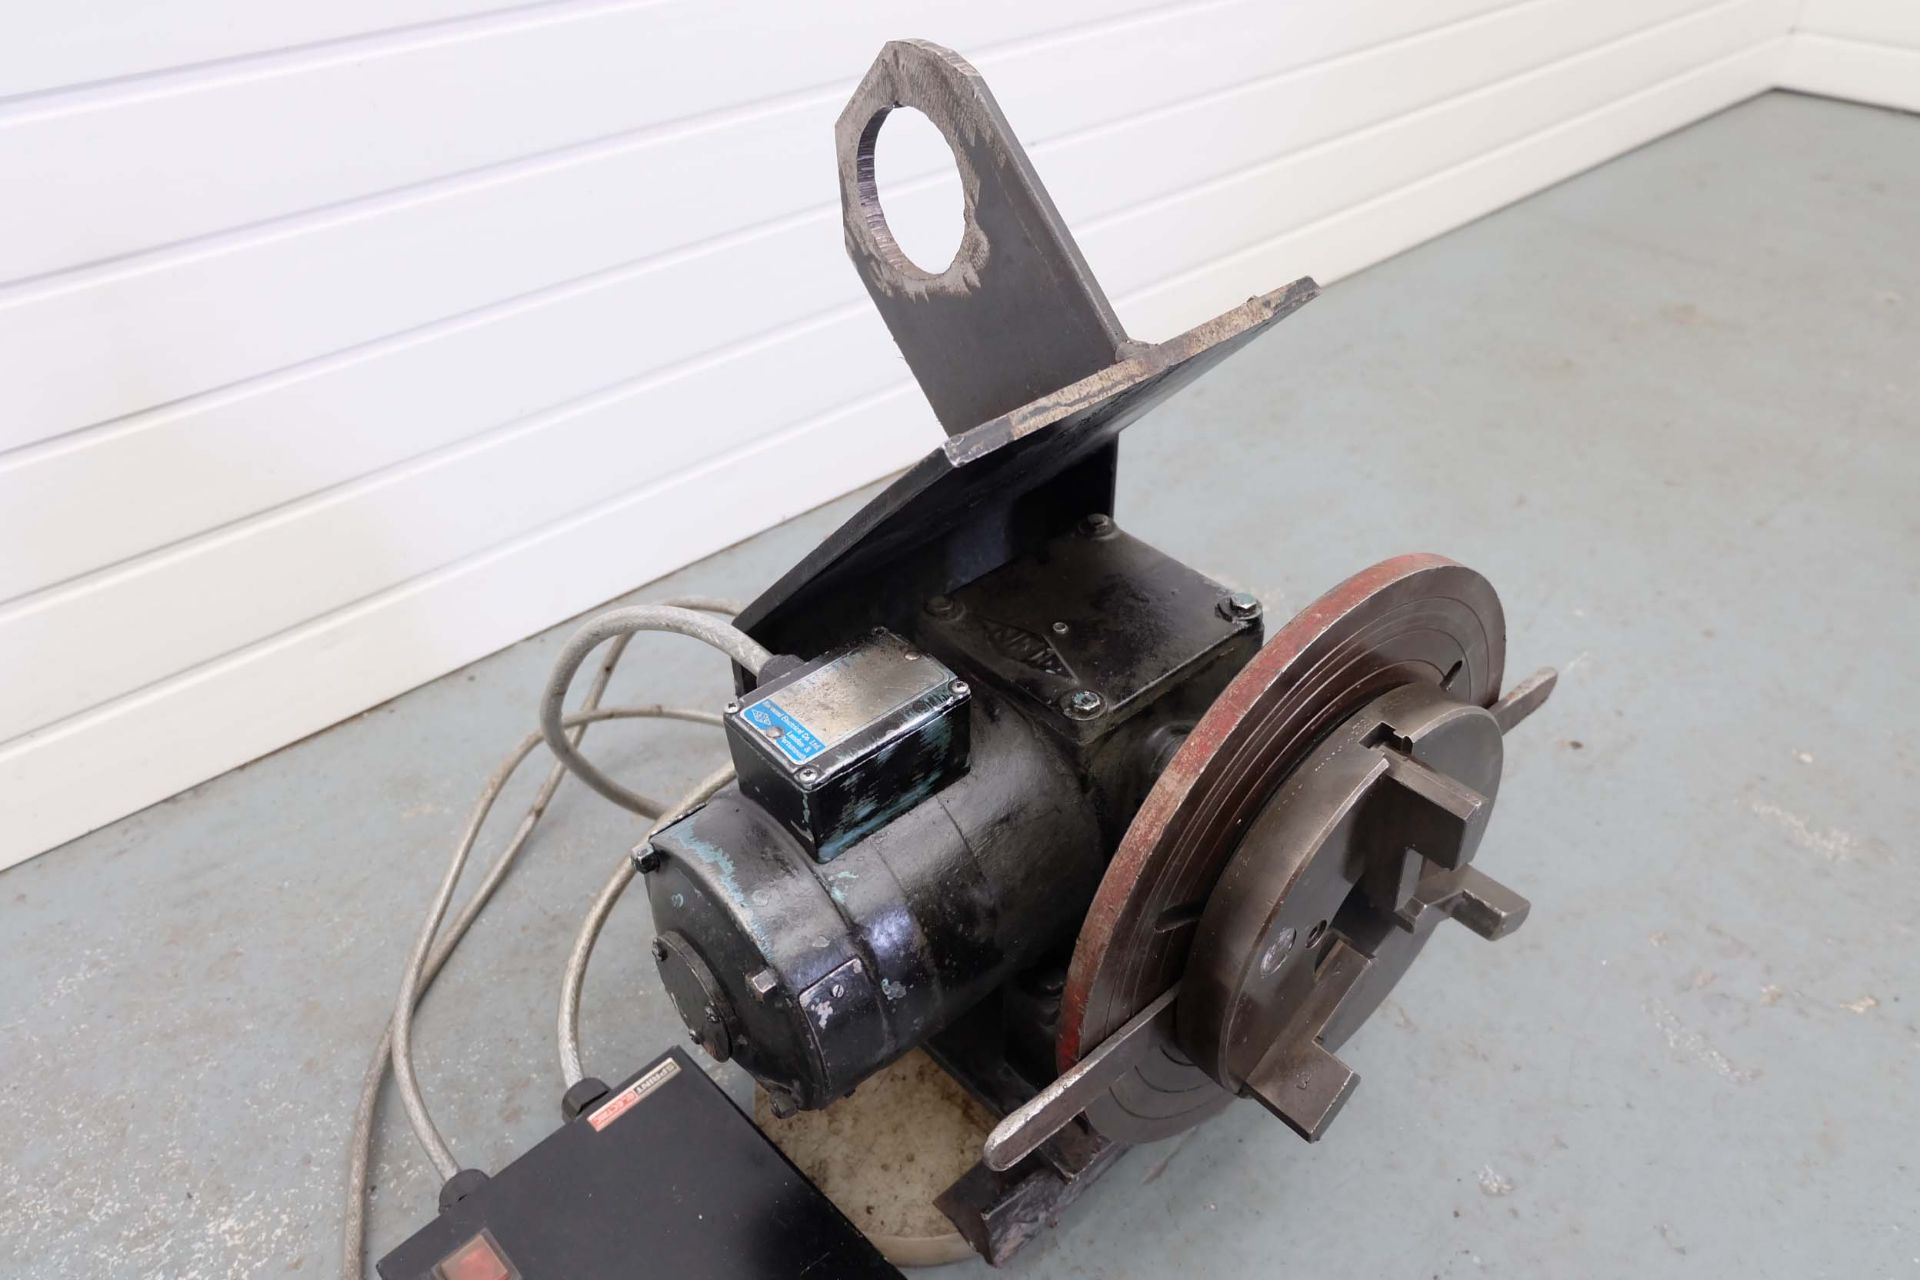 Co-Weld Products. Variable Speed Welding Rotator. With 300mm Face Plate and 200mm Three Jaw Chuck. S - Image 2 of 8